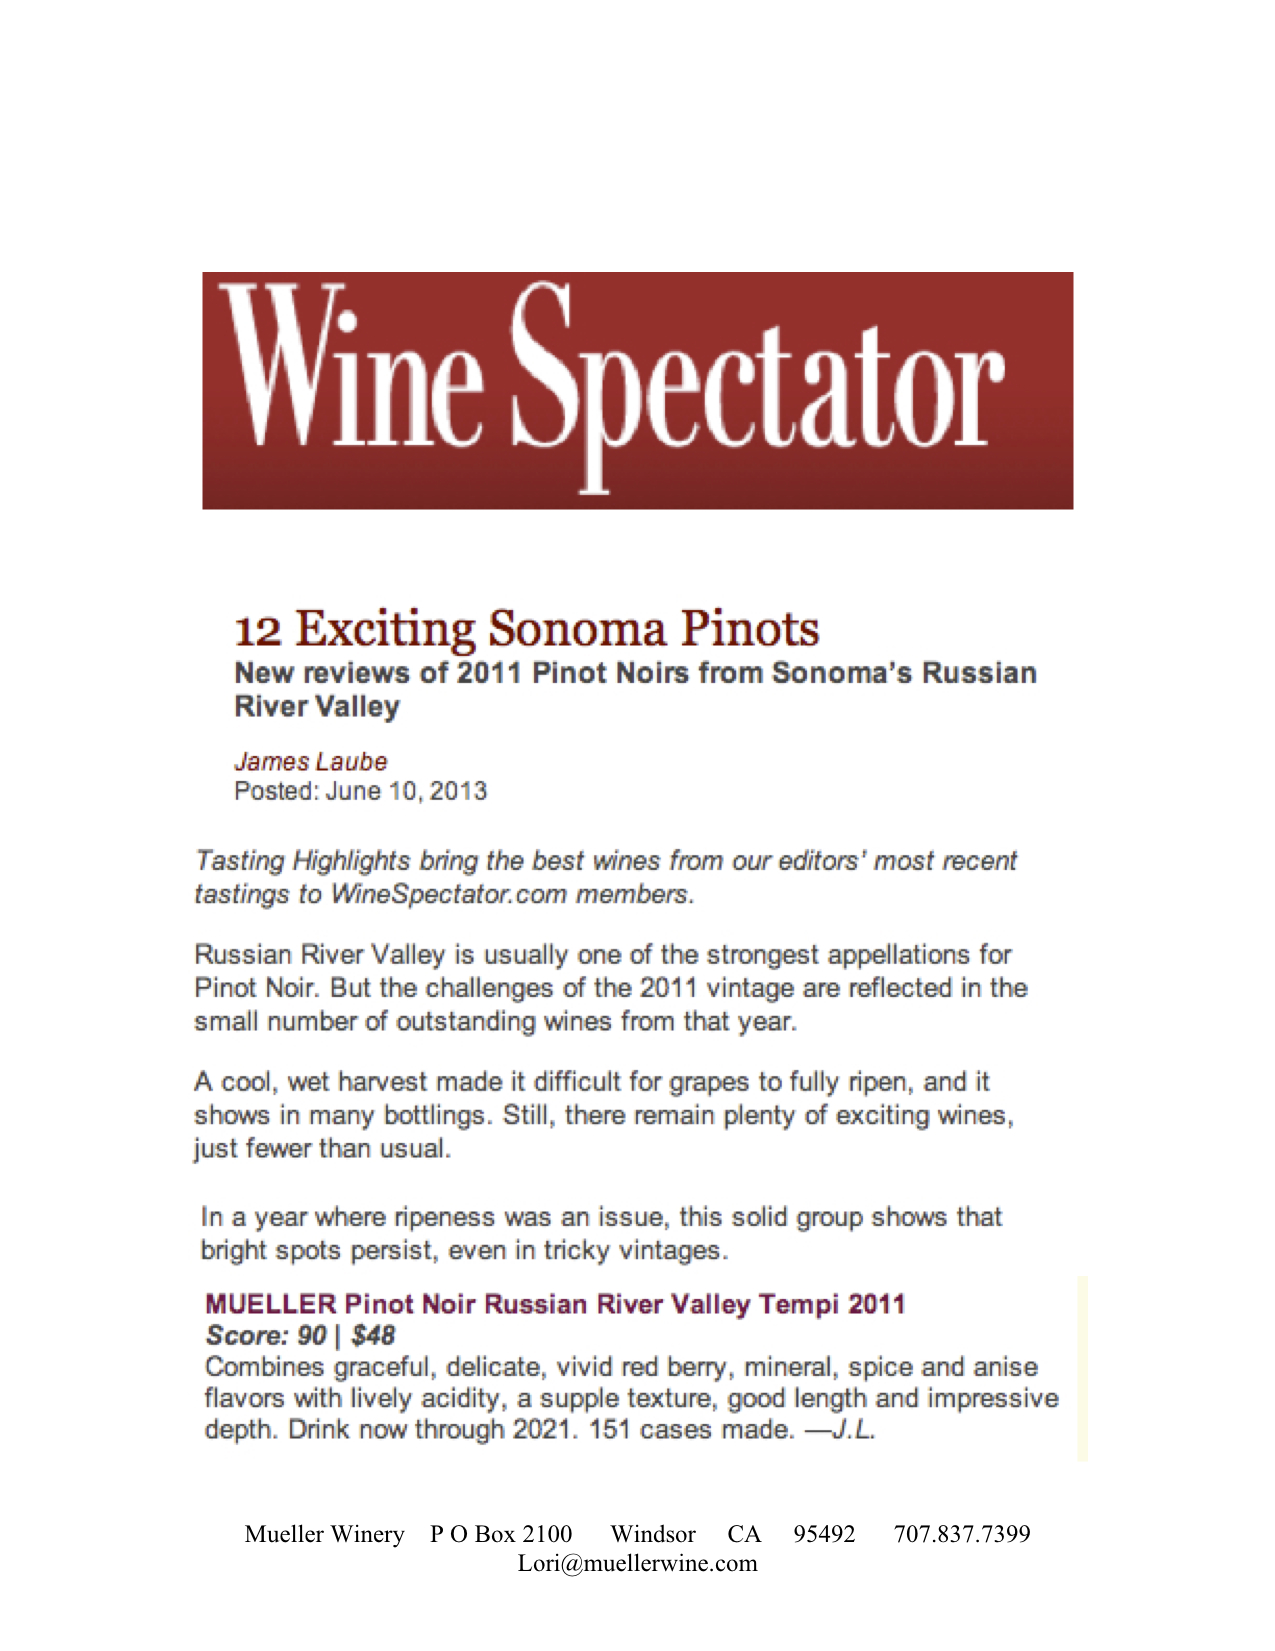  - 12-exciting-sonoma-pinots